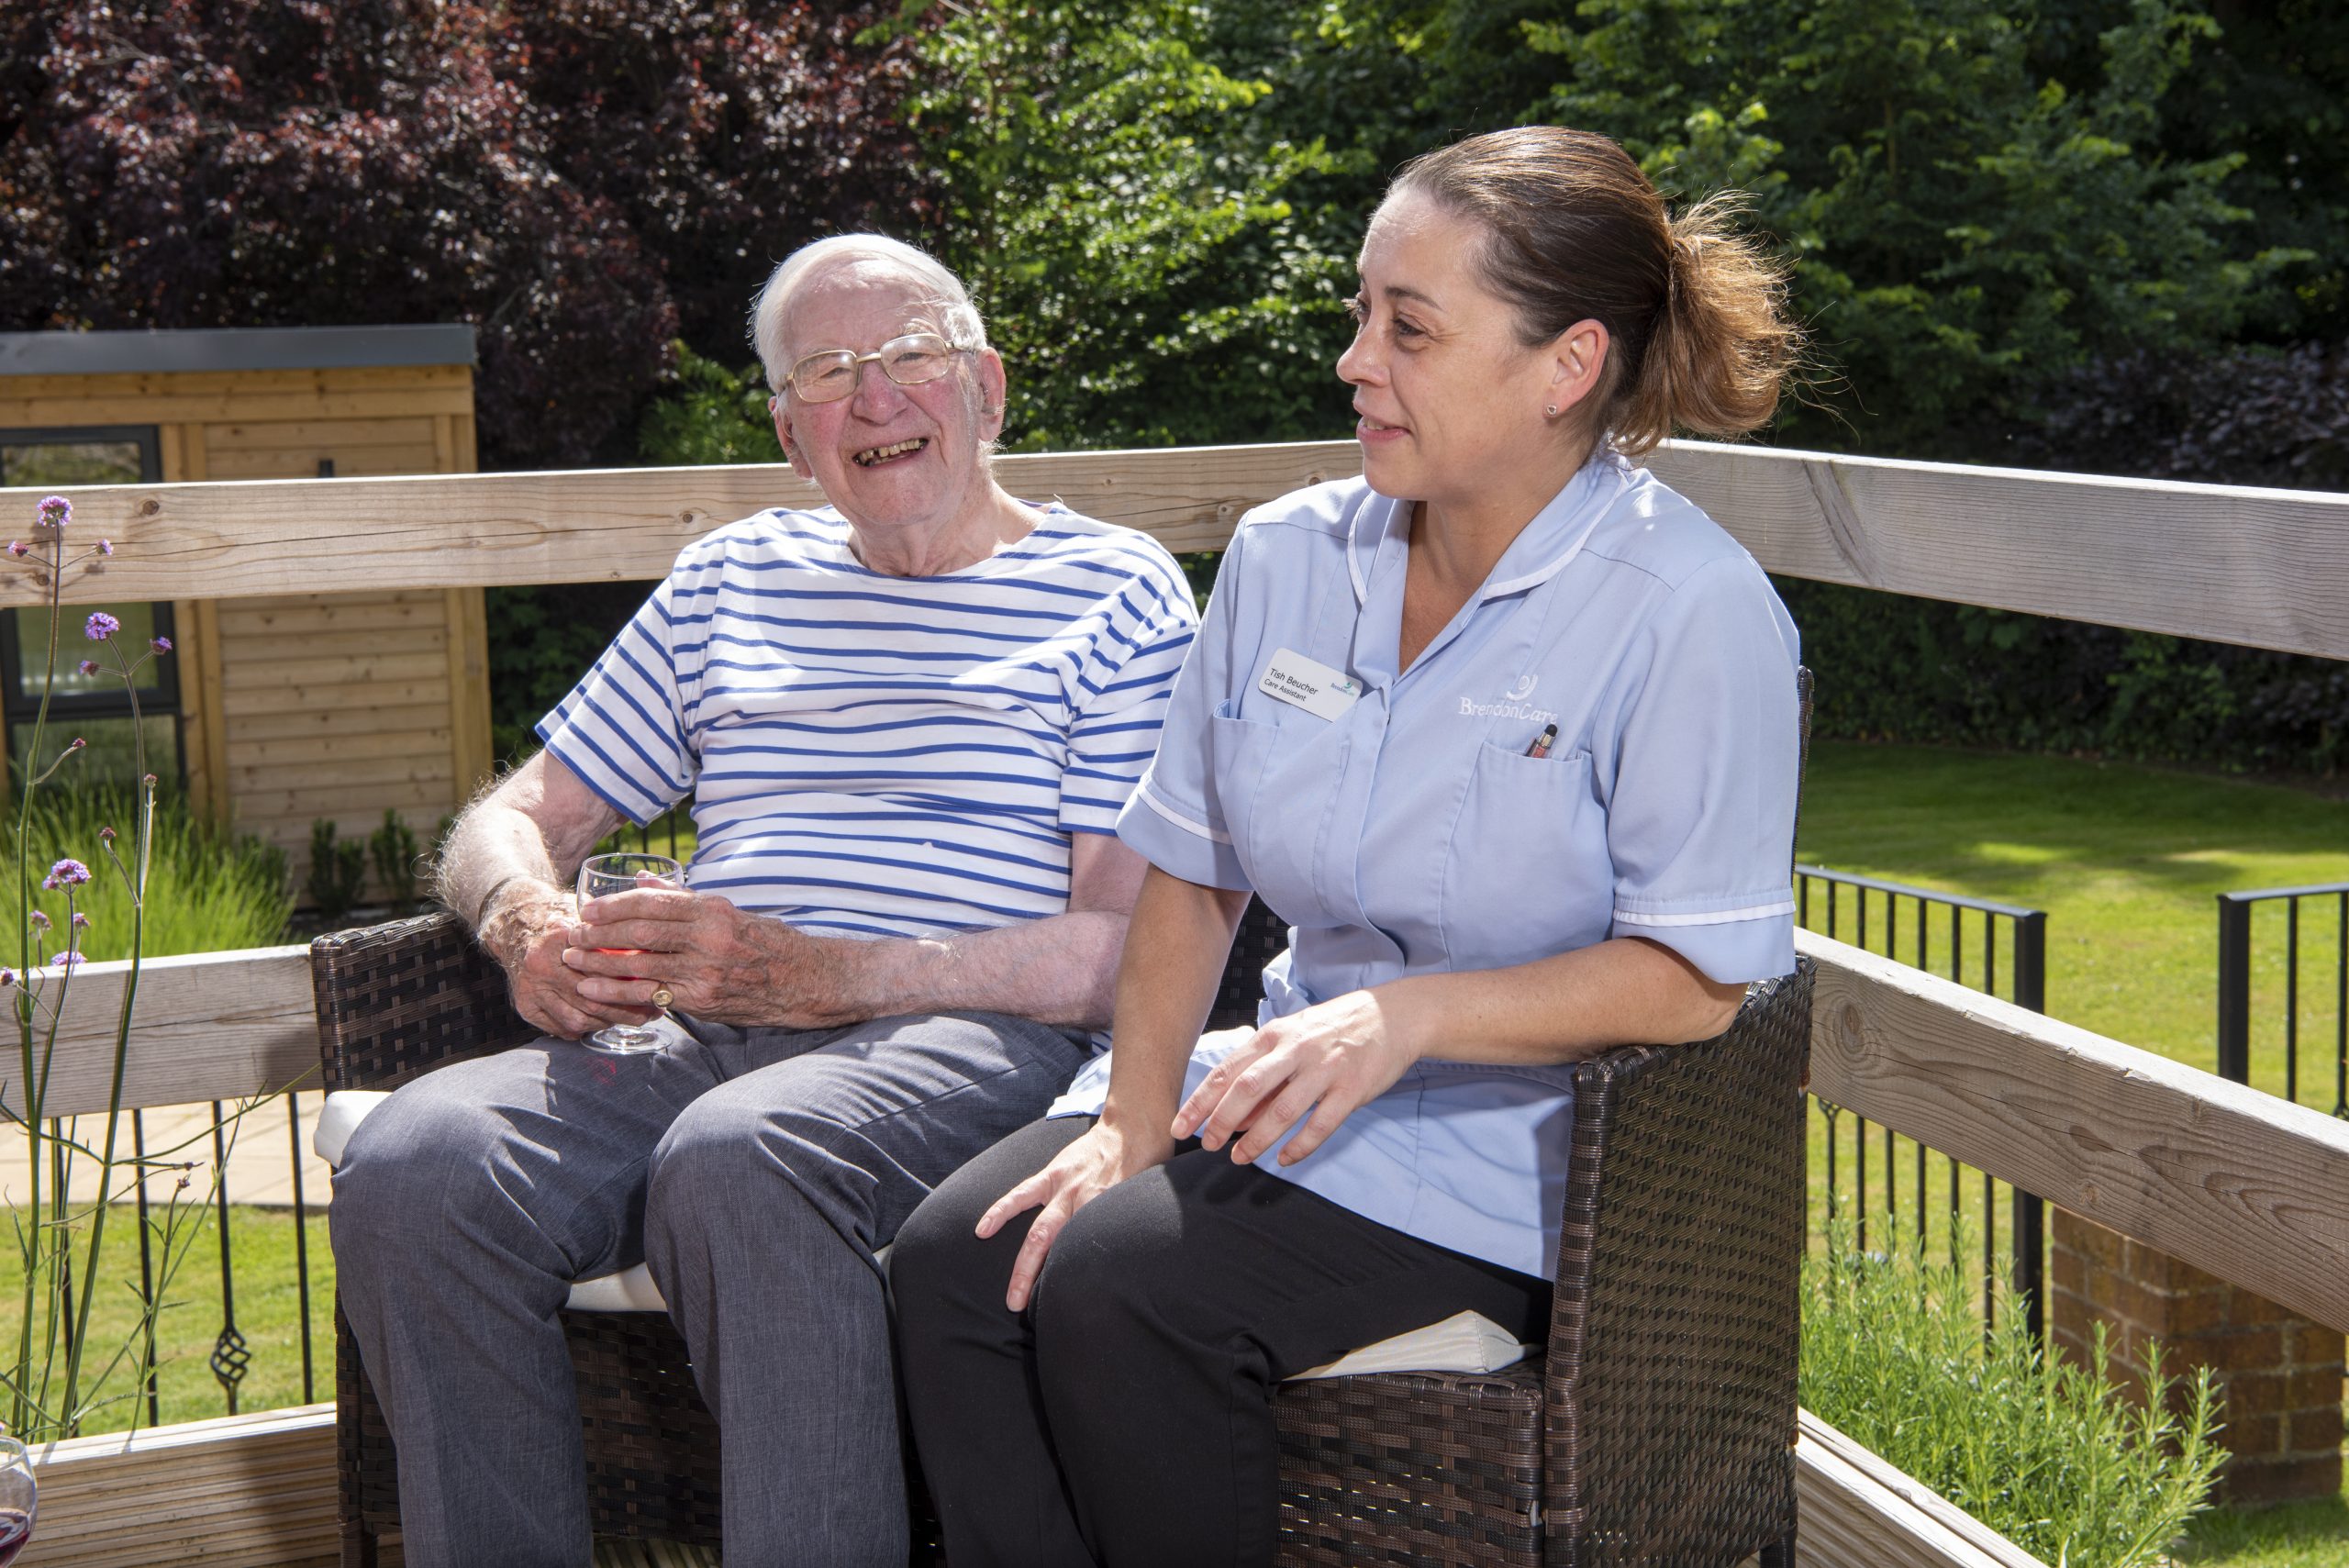 Meadway resident and carer enjoying the sunshine